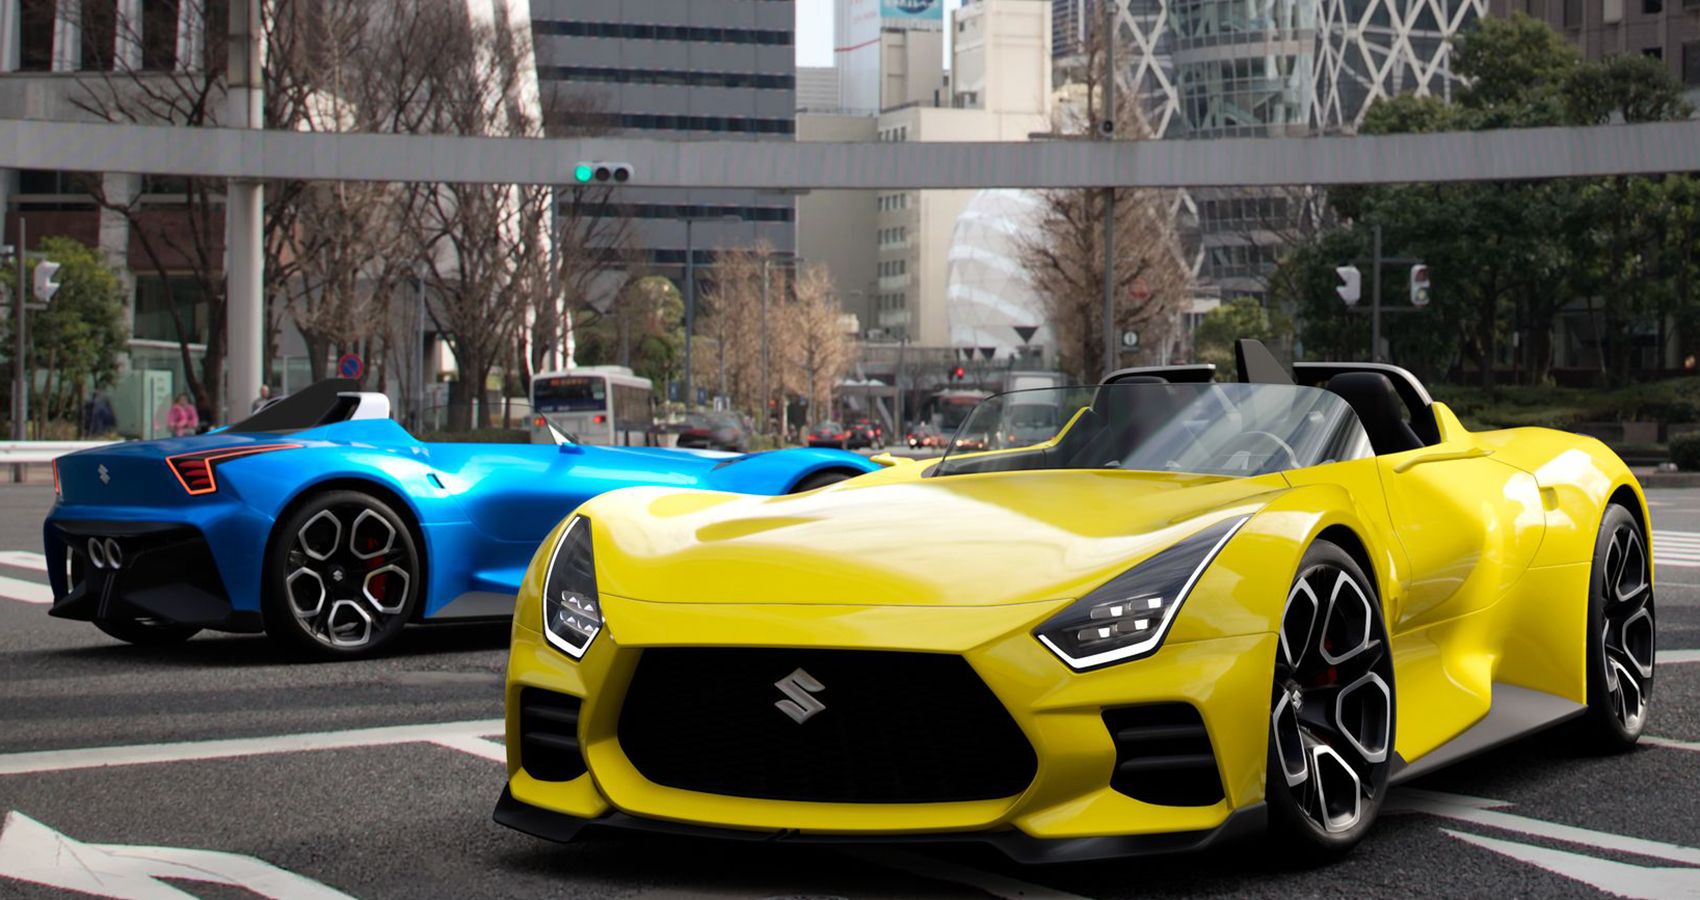 Suzuki Vision Gran Turismo concept in street, yellow, front quarter with blue example behind